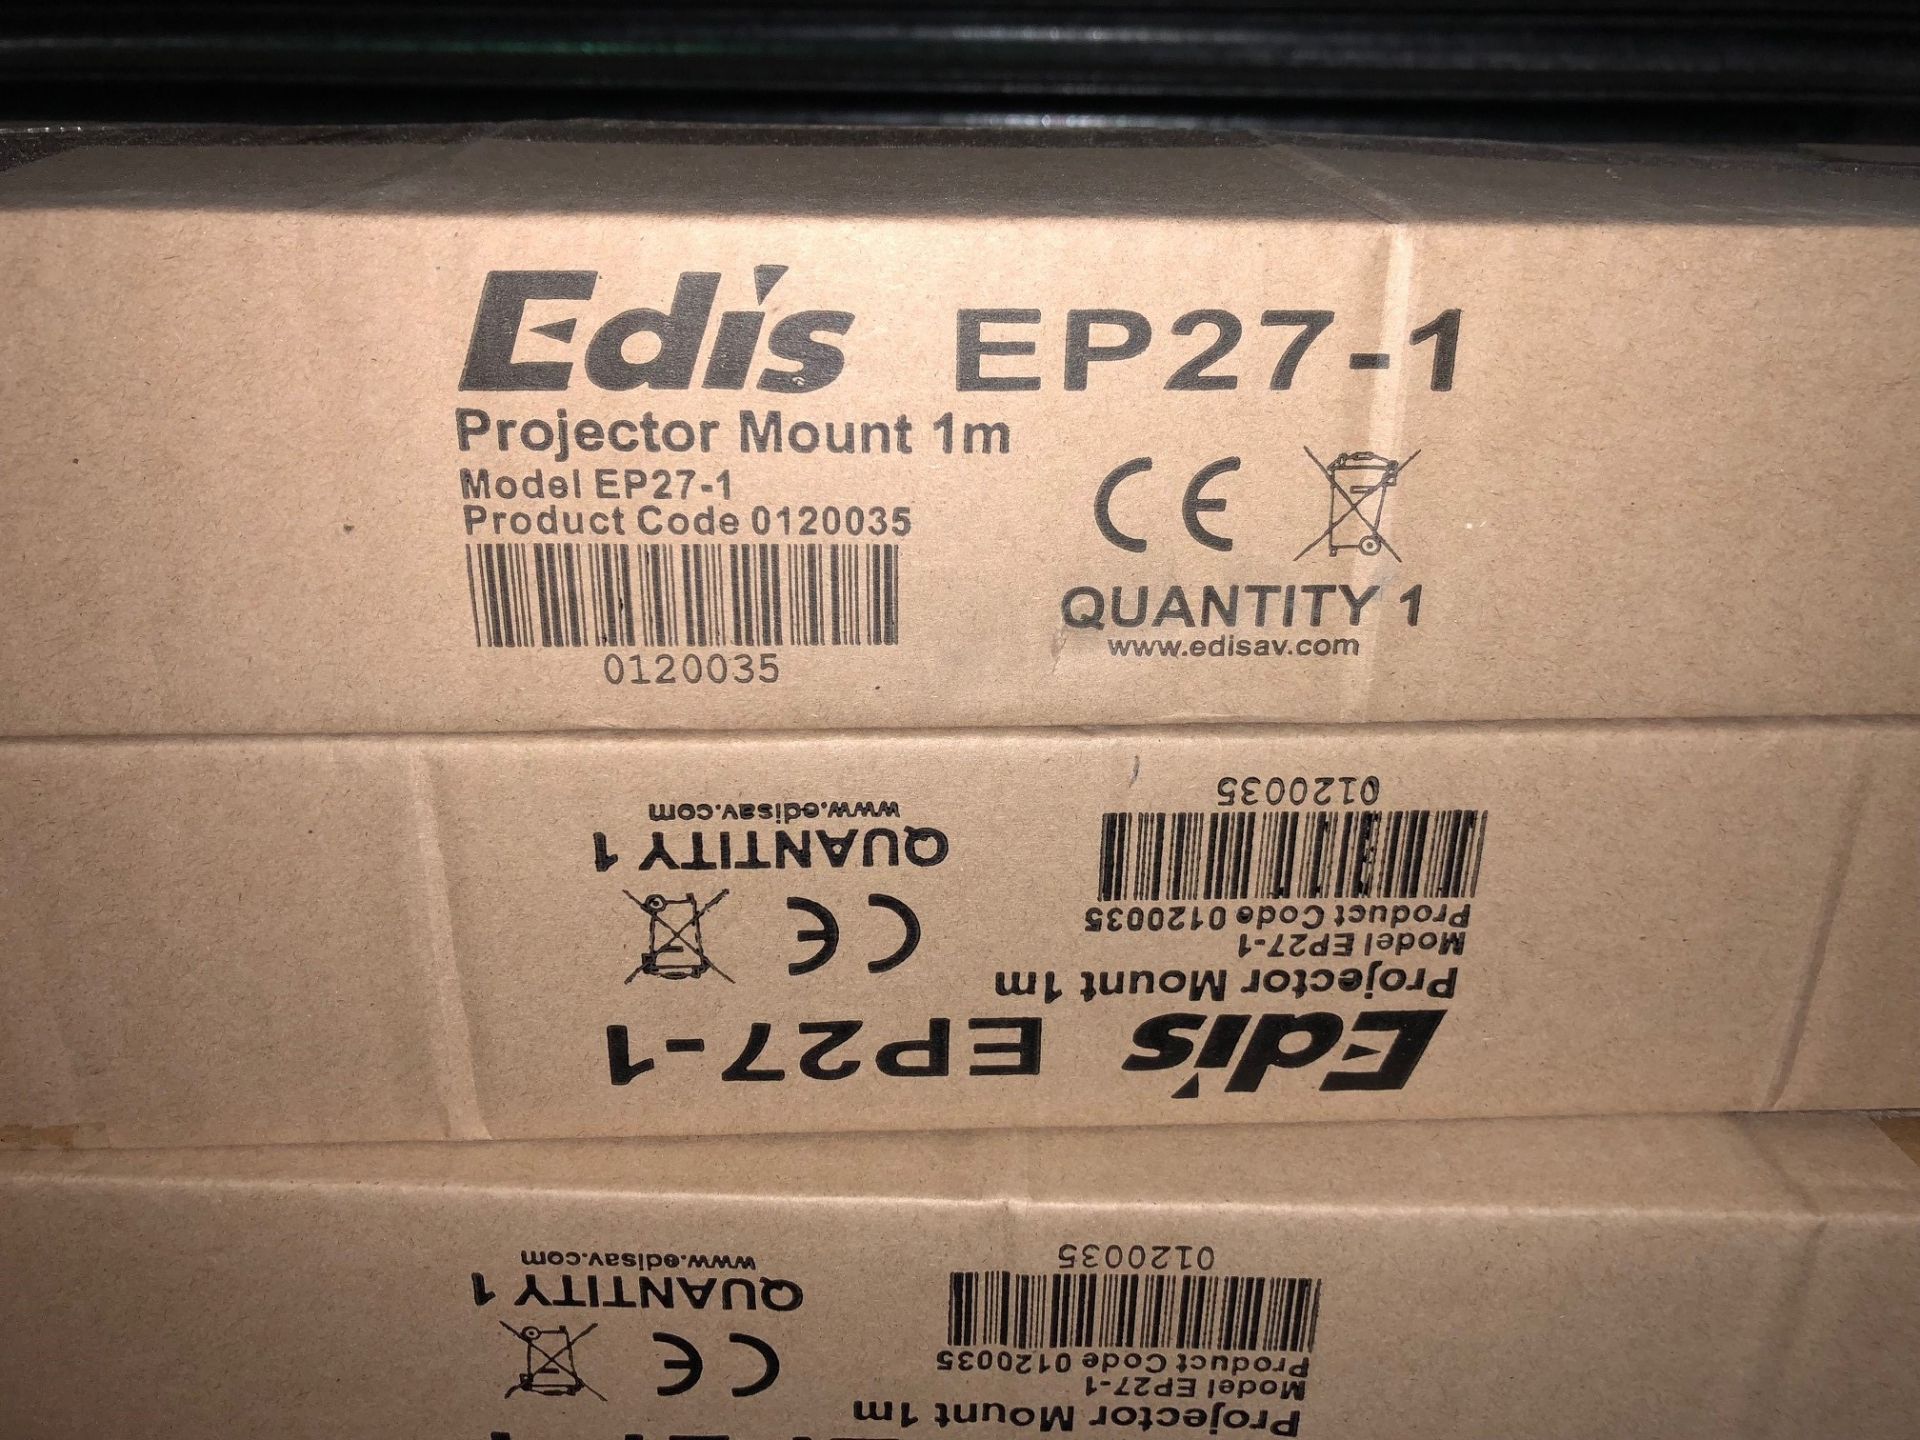 1 x Edis EP27 1 Metre Projector Mount (Brand New & Boxed) - Image 2 of 2